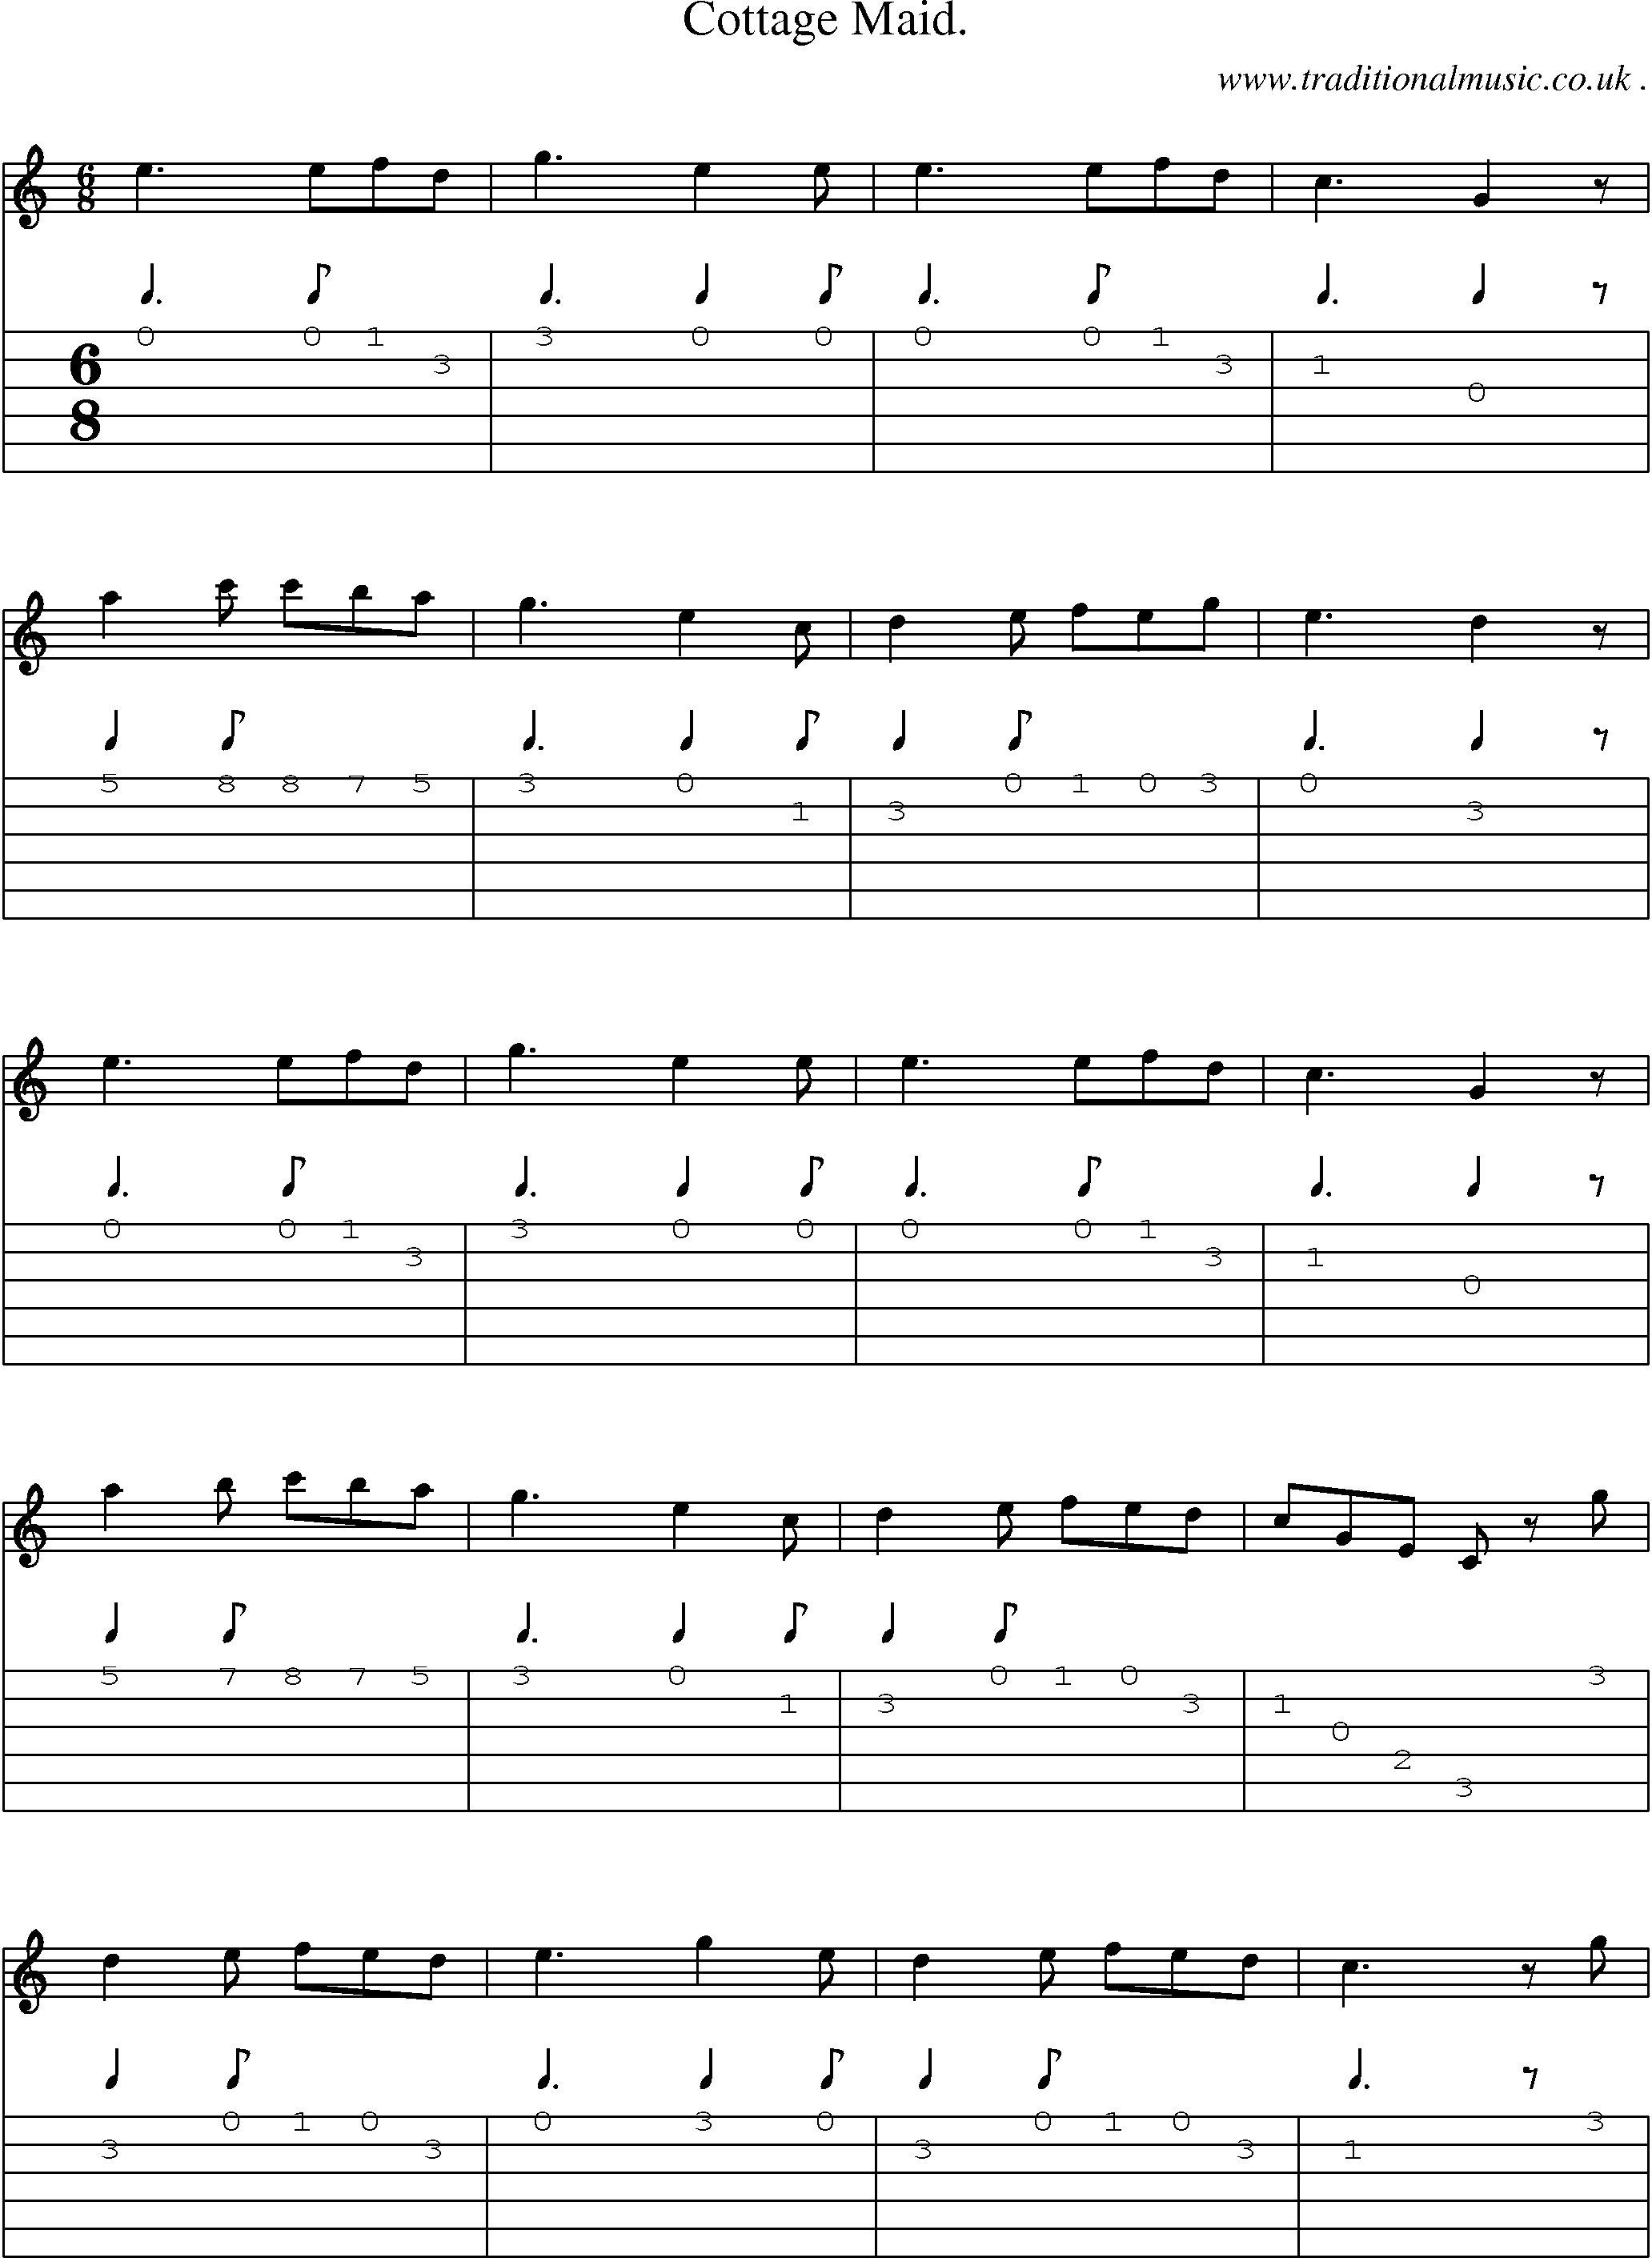 Sheet-Music and Guitar Tabs for Cottage Maid